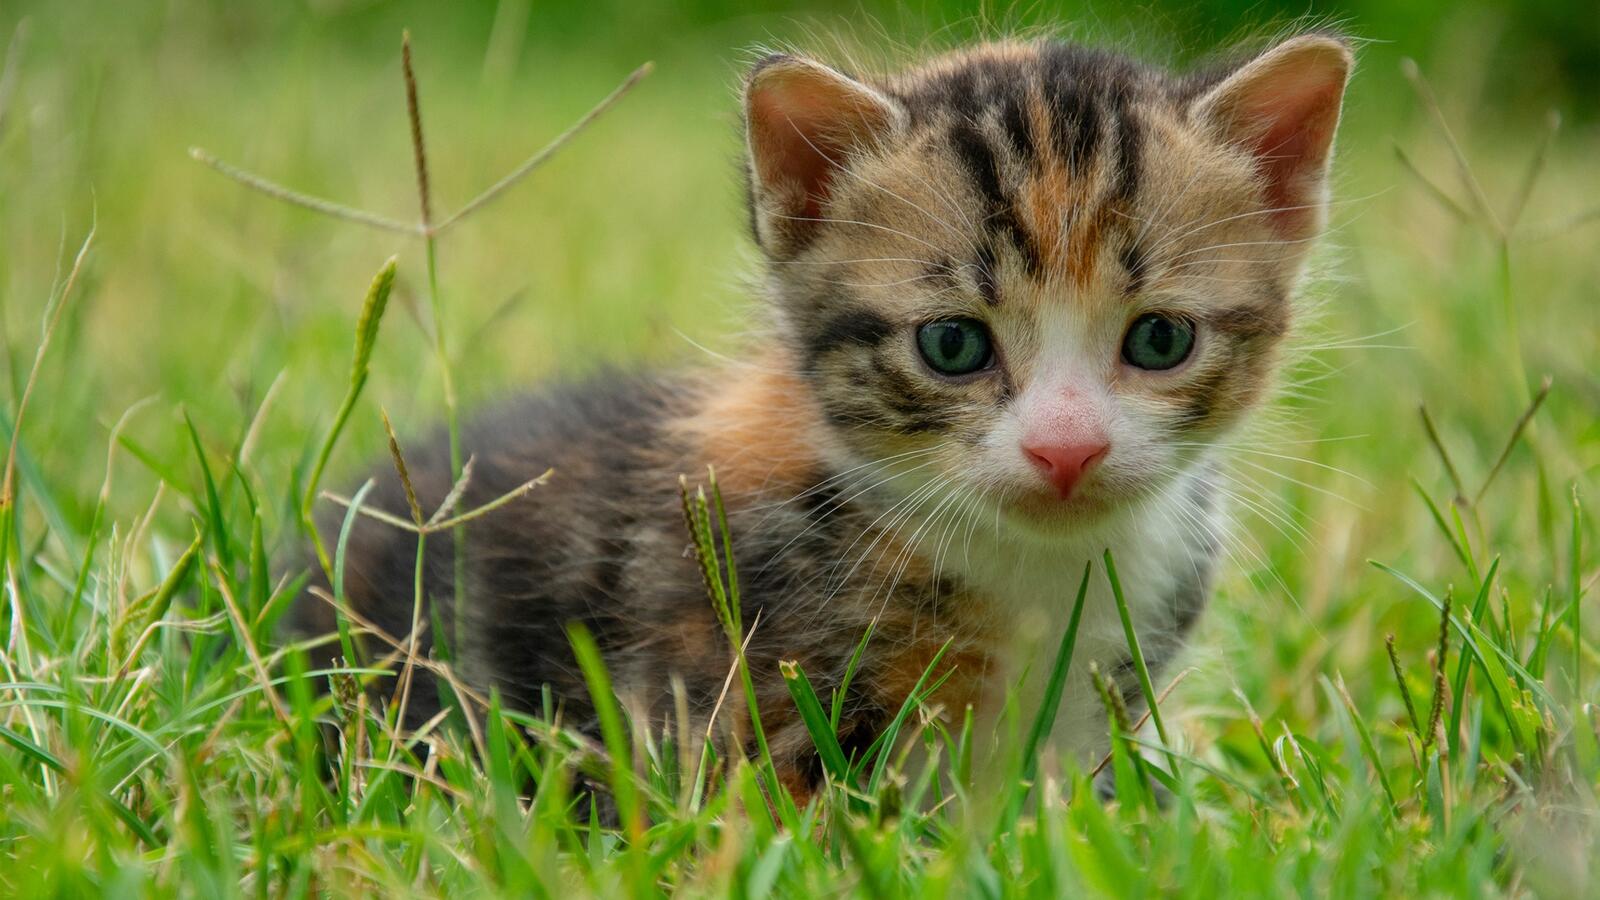 Free photo A cute kitten sitting in the grass.